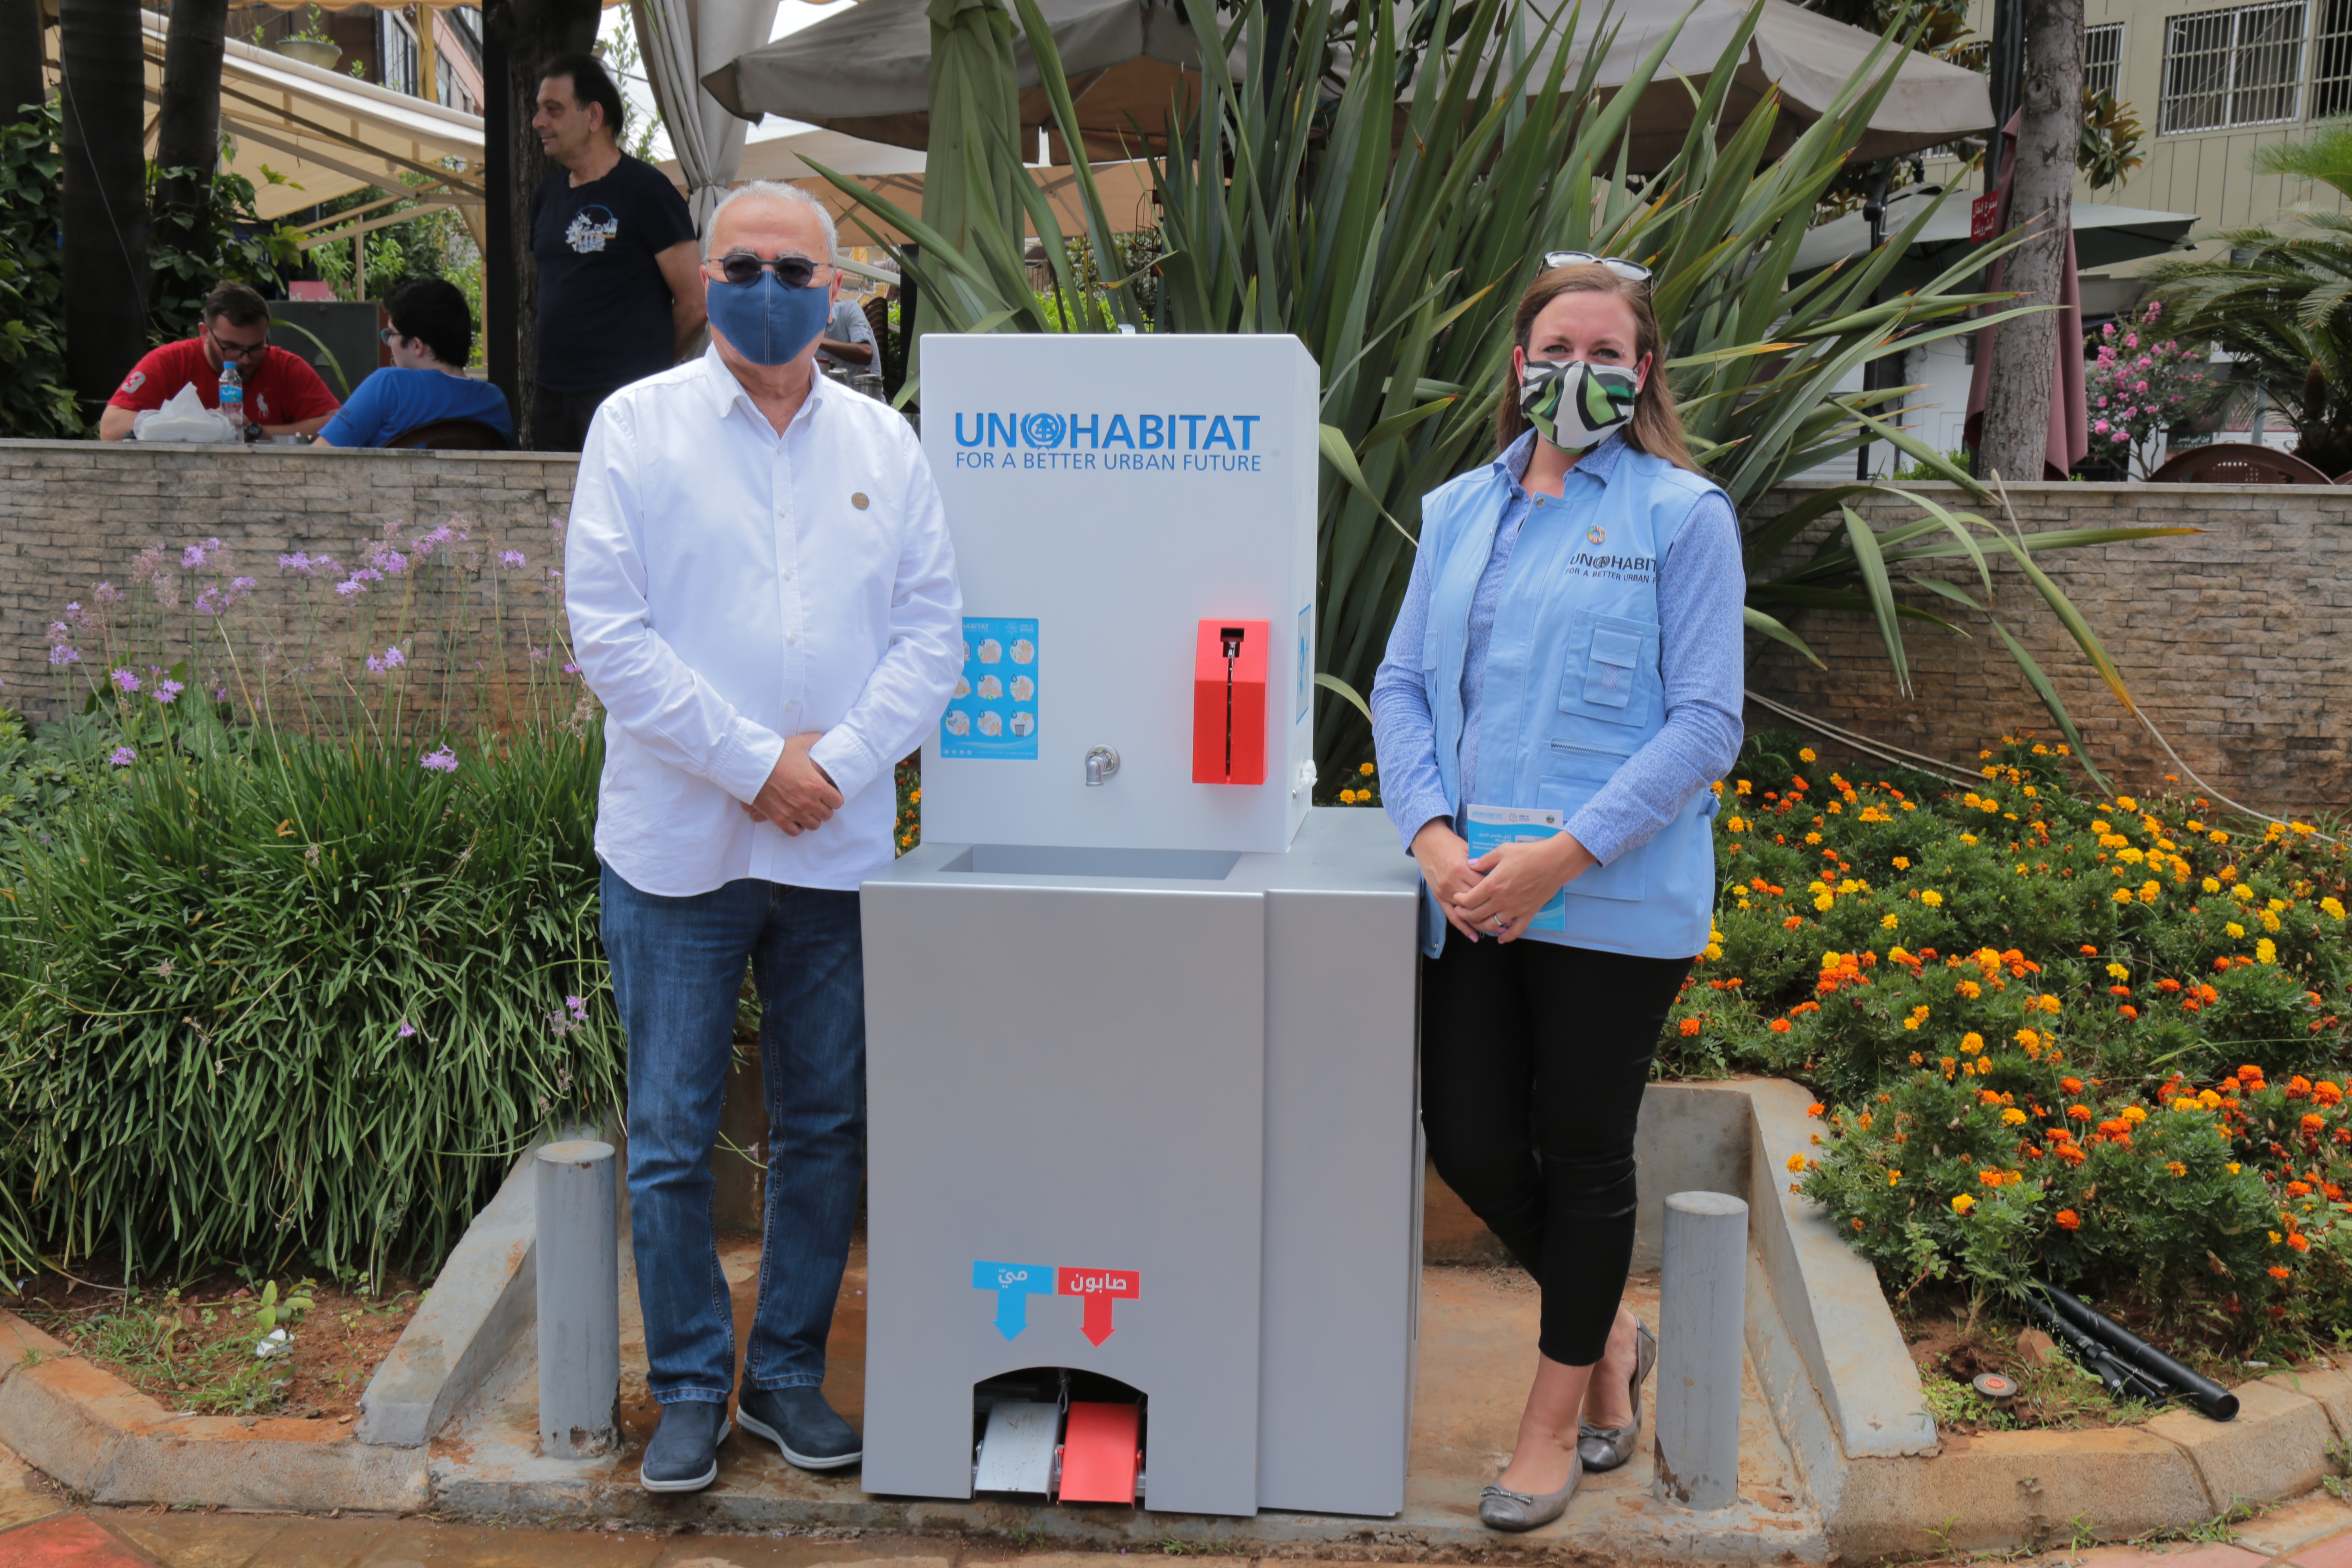 The inauguration of the first communal handwashing stations in Lebanon to prevent the spread of COVID-19 and other illnesses with the Mayor of Bourj Hammoud, Mount Lebanon Mardig Boghossian and the head of UN-Habitat Lebanon Country Programme Taina Christiansen